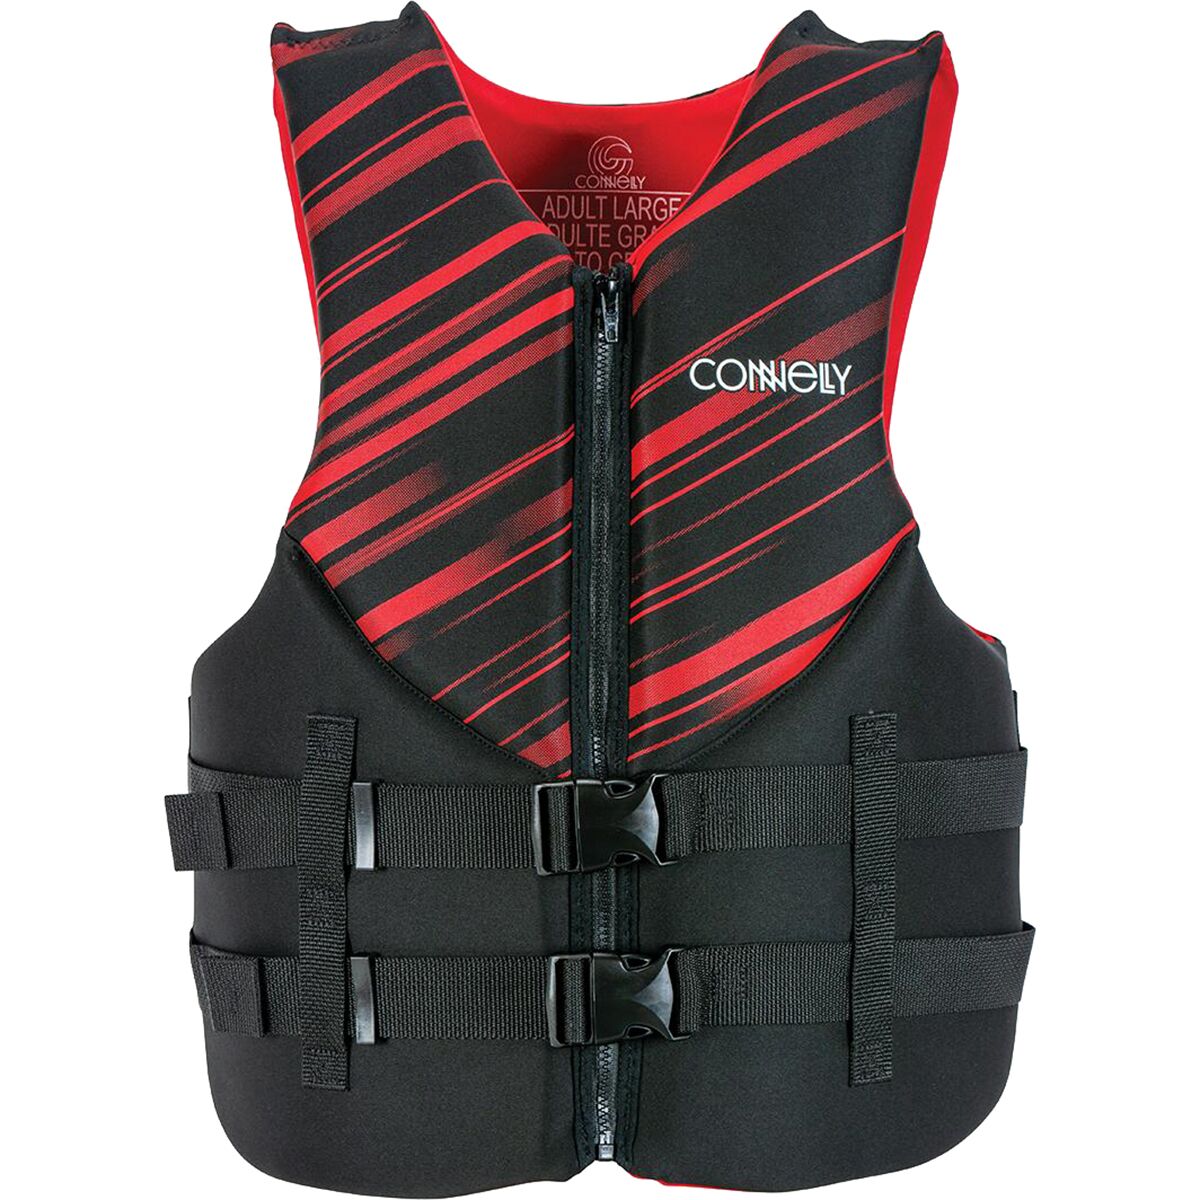 Connelly Skis Promo Neo Vest